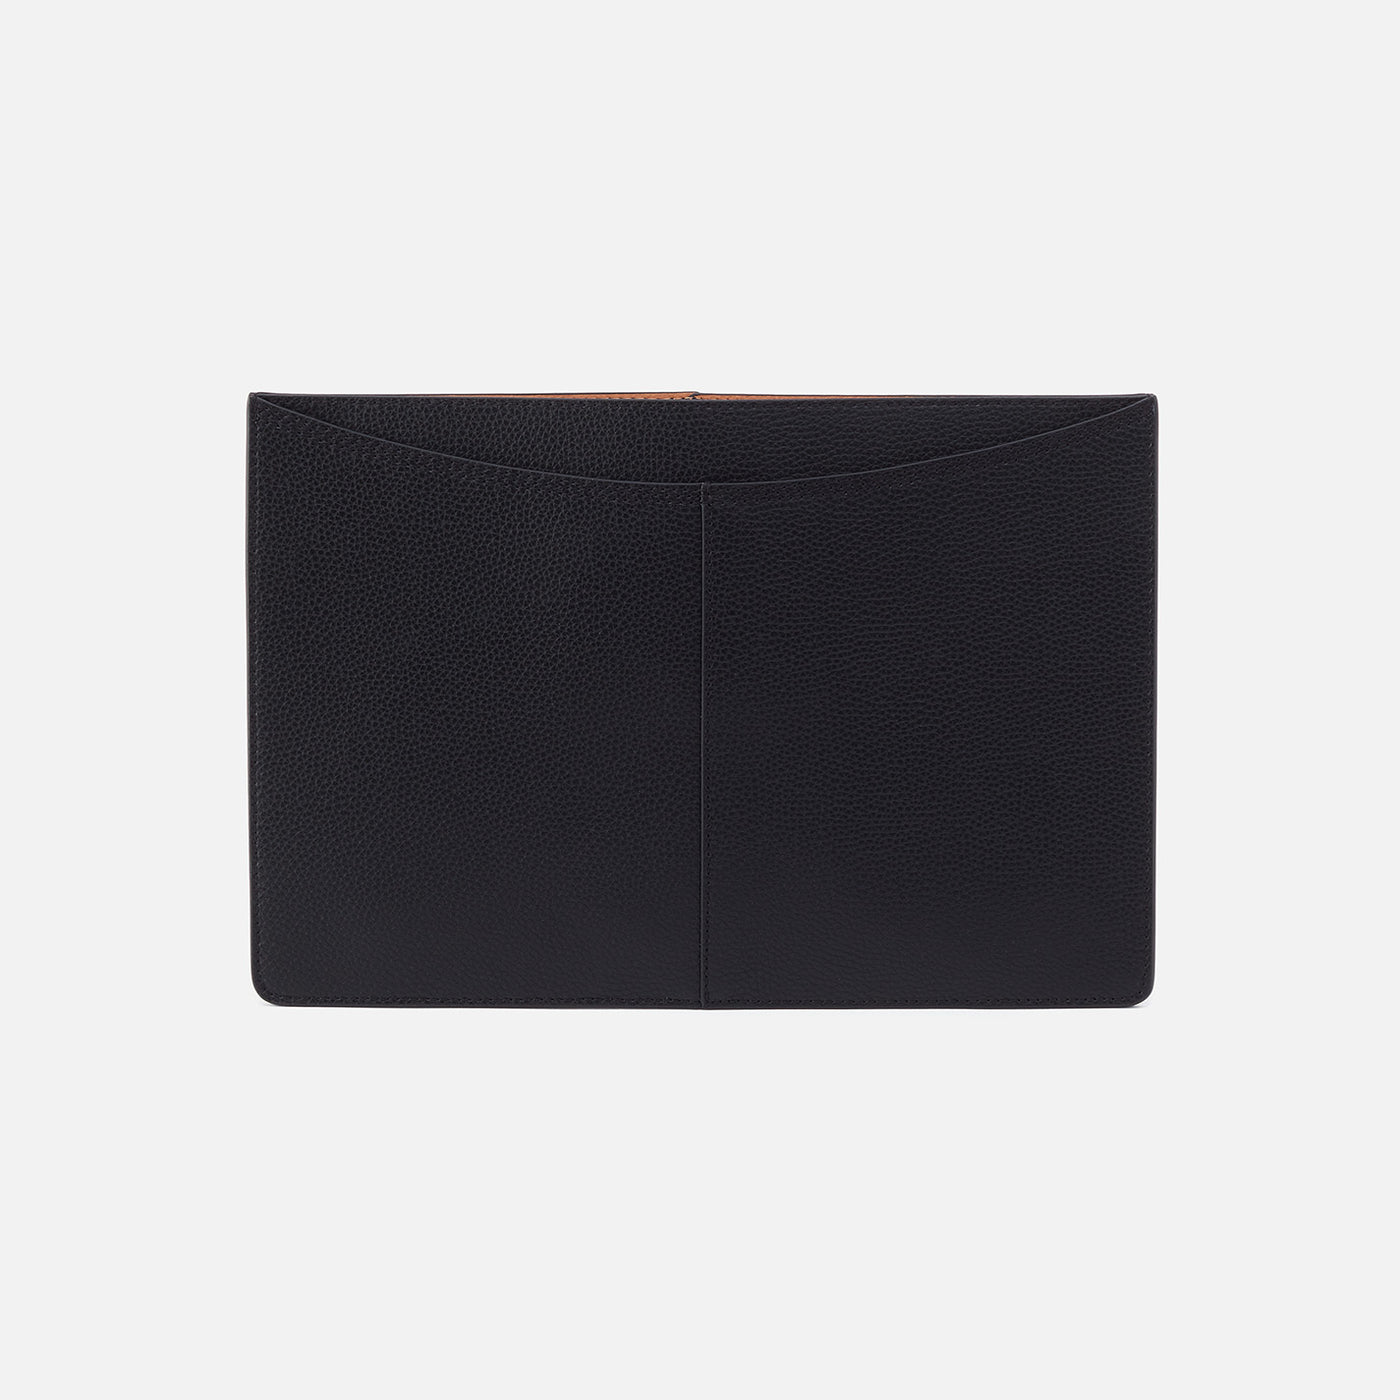 Vida Laptop in Micro Pebbled Leather - Black and Biscuit